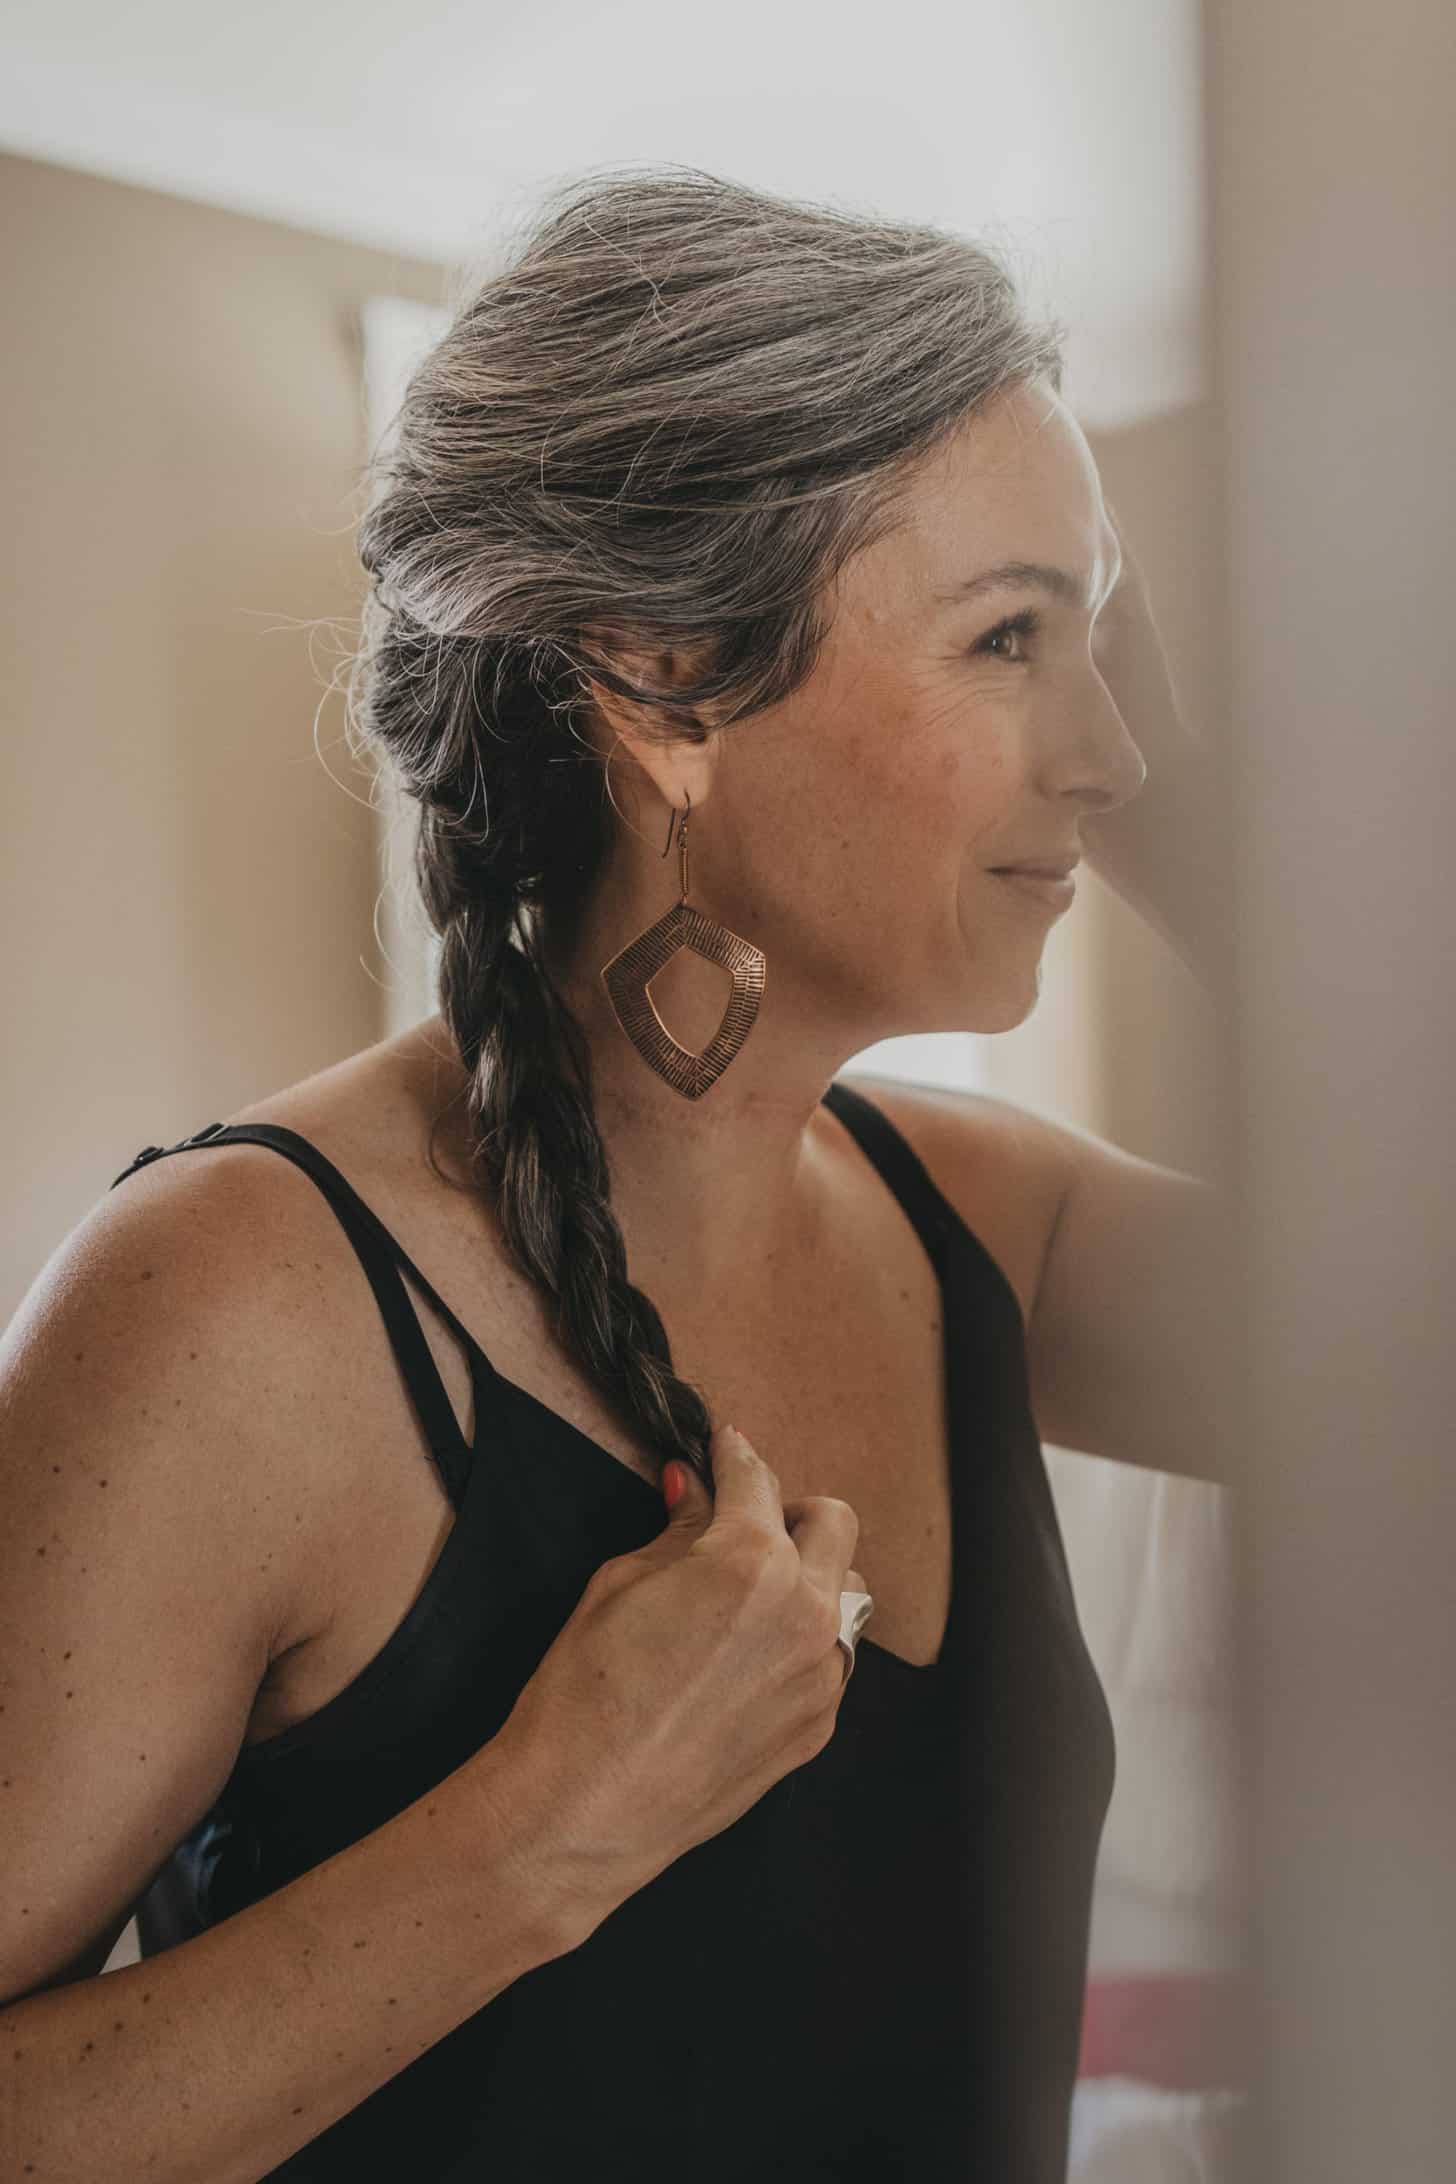 a woman with a long gray braid looks into the mirror